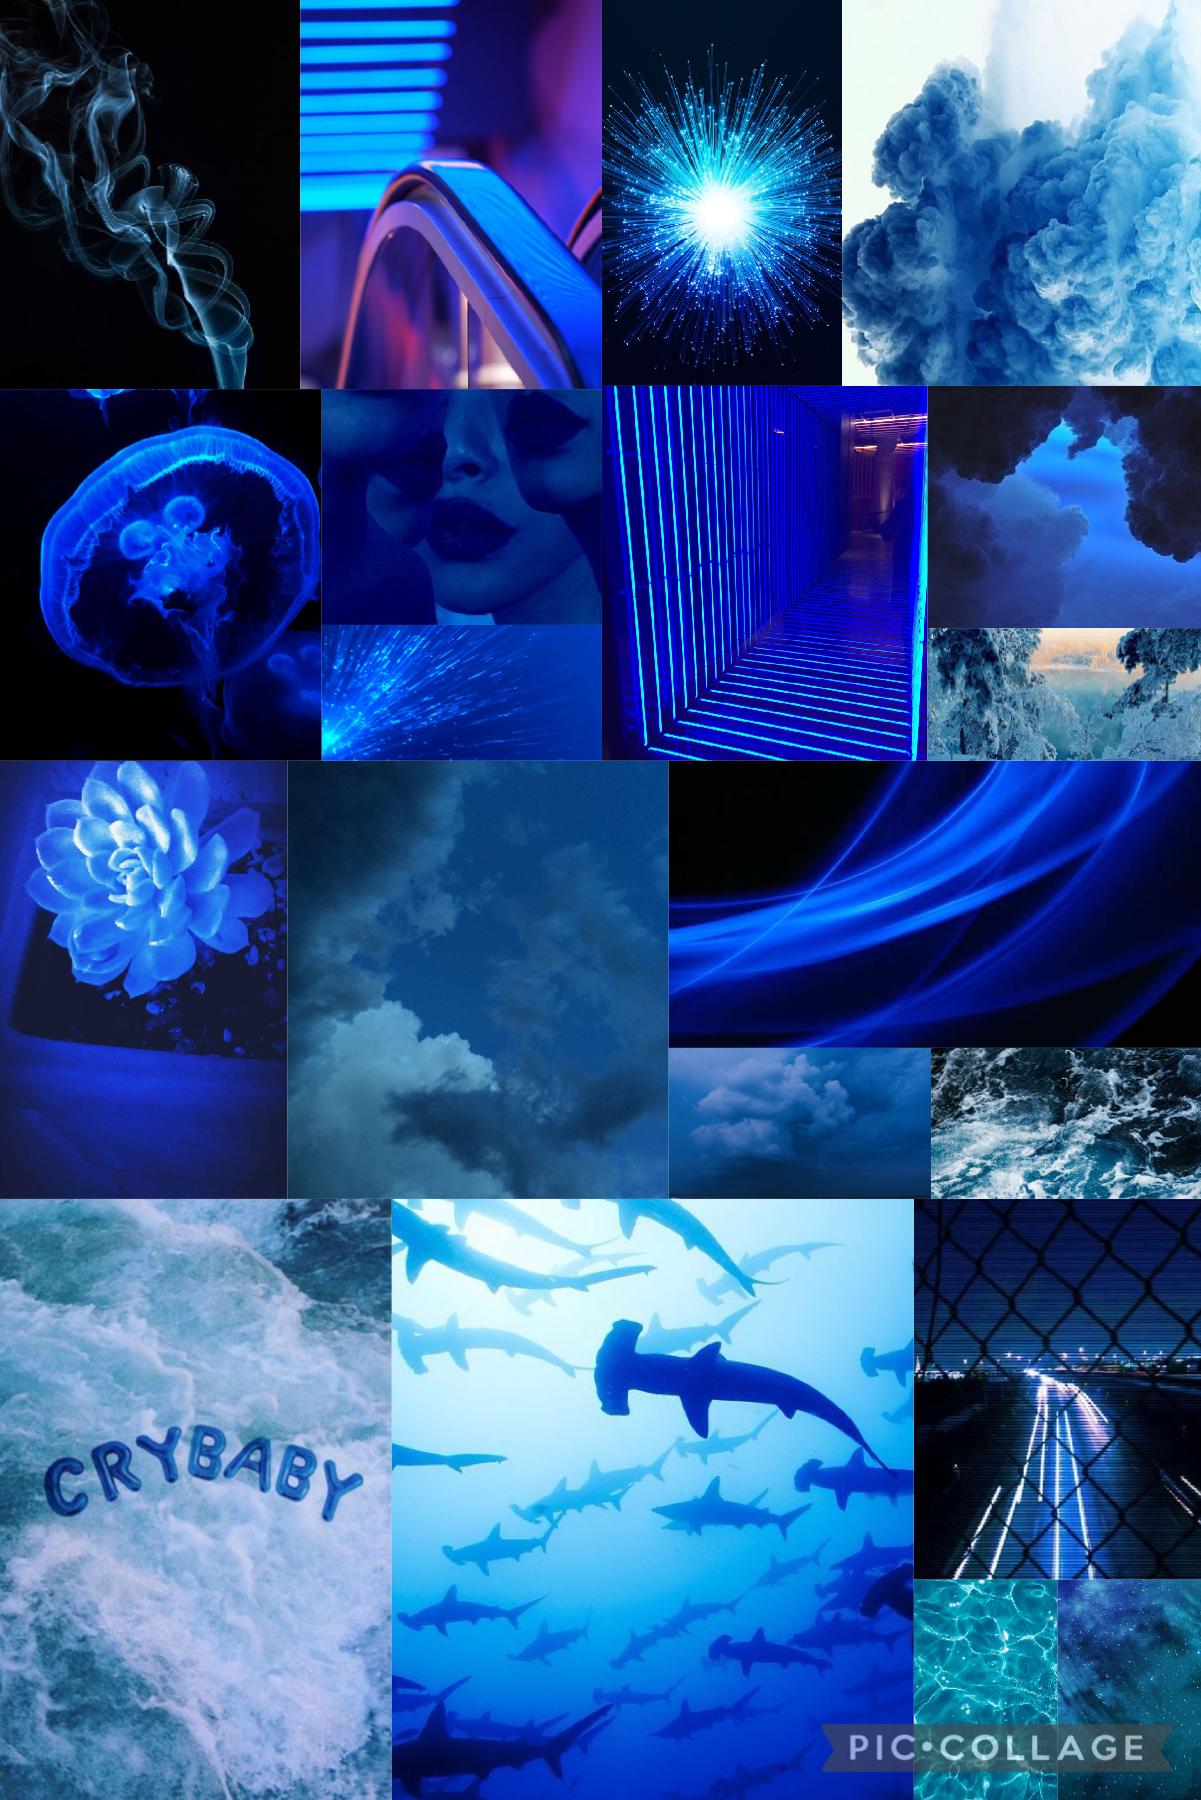 💙🥶🦋Tap🦋🥶💙

Sorry I haven’t posted in a long time but here’s a nice blue ✨aesthetic✨